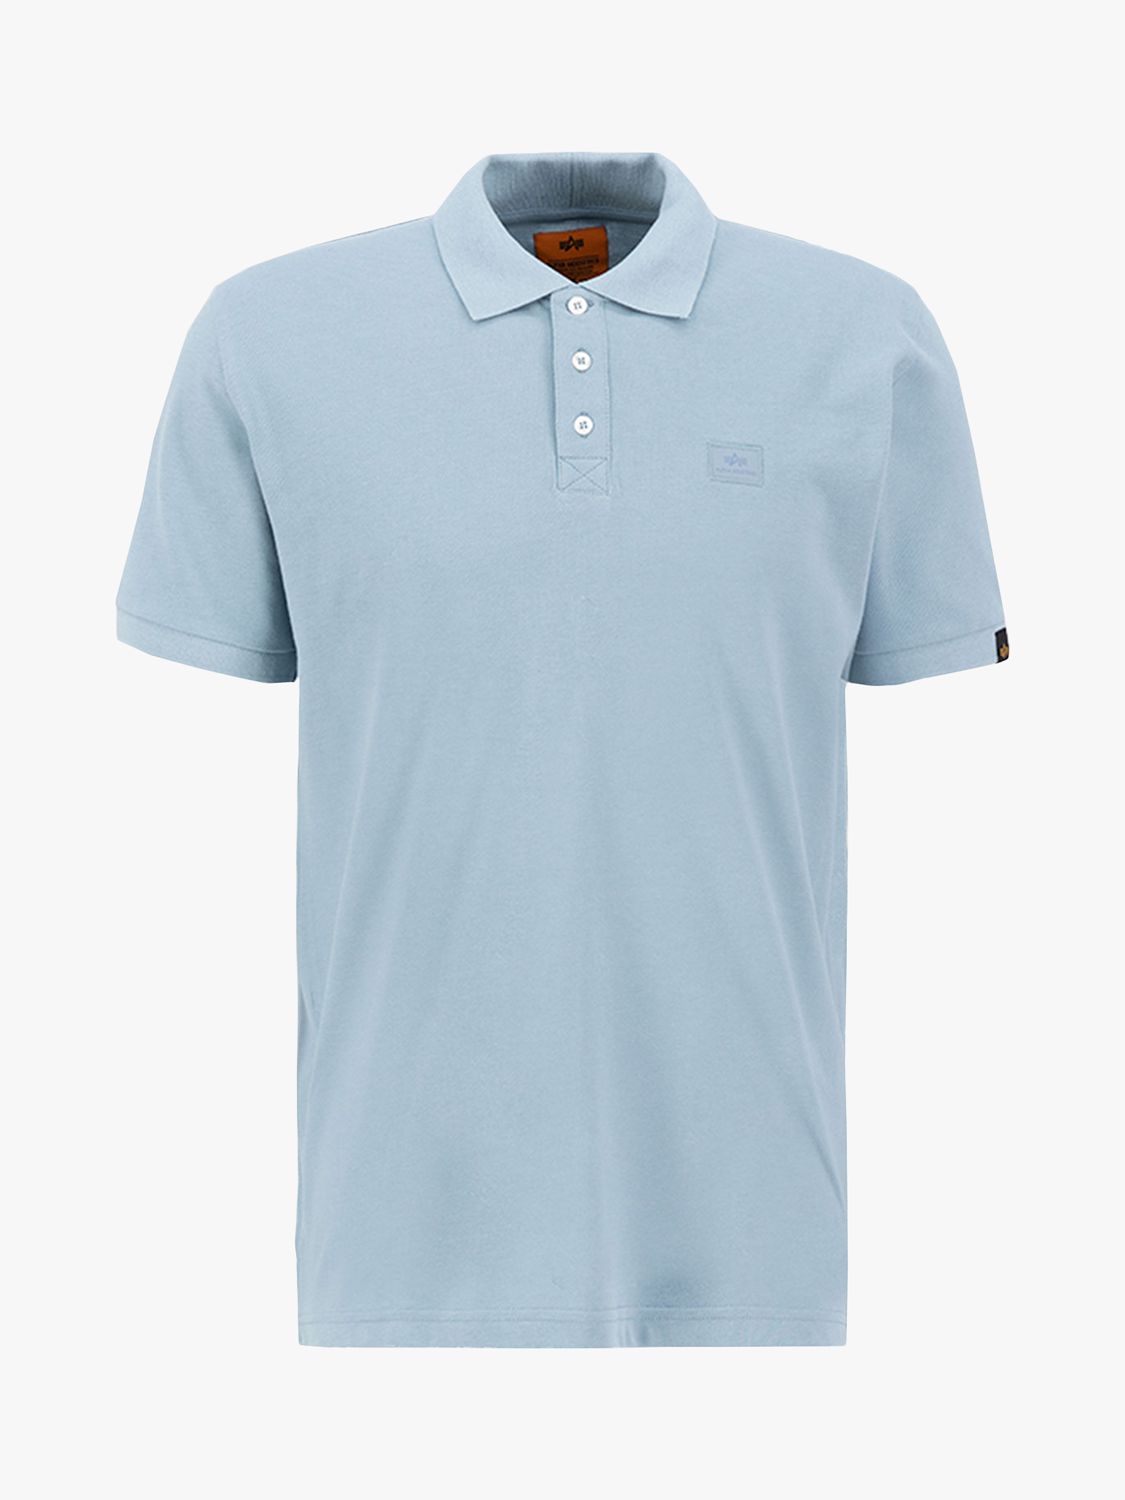 Neue Produkte und berühmter Alpha Industries X-Fit Polo, Greyblue Lewis John at Partners 